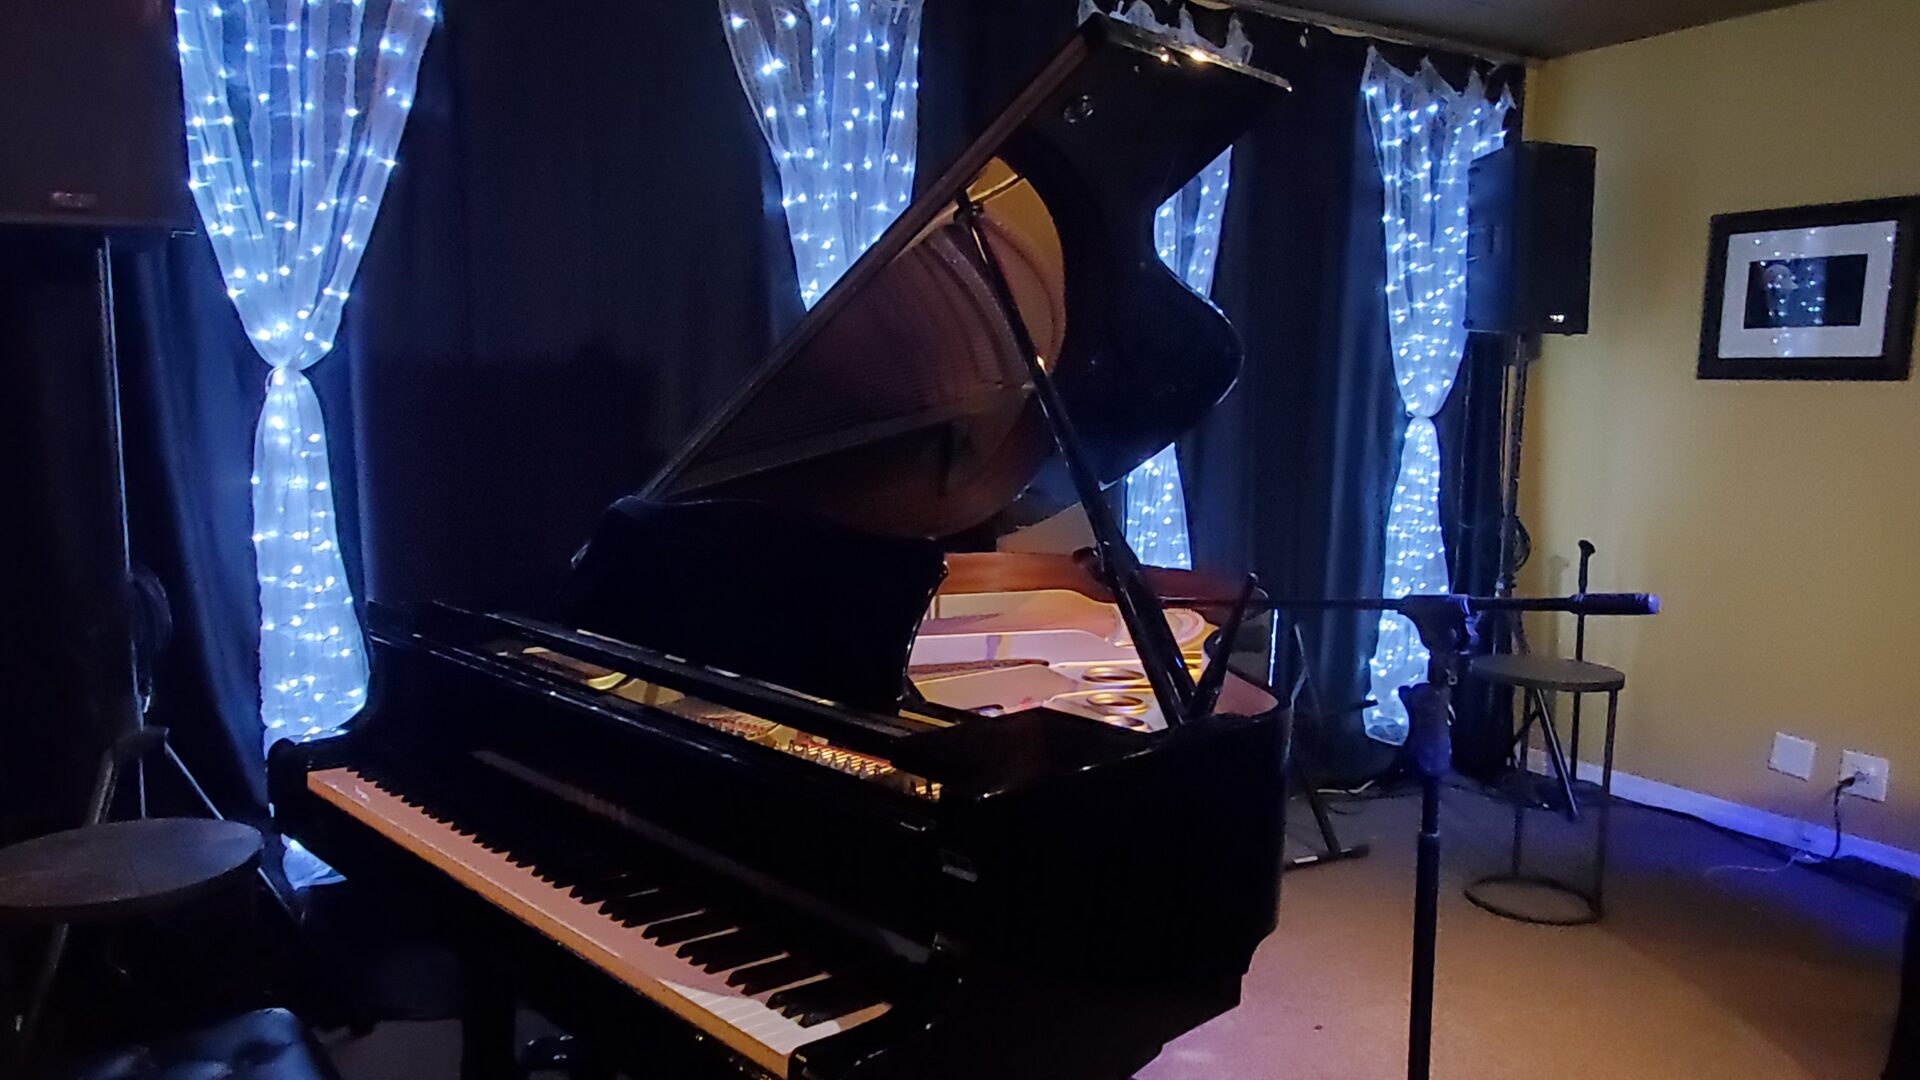 Black grand piano in front of white pulled curtains illuminated by fairy lights